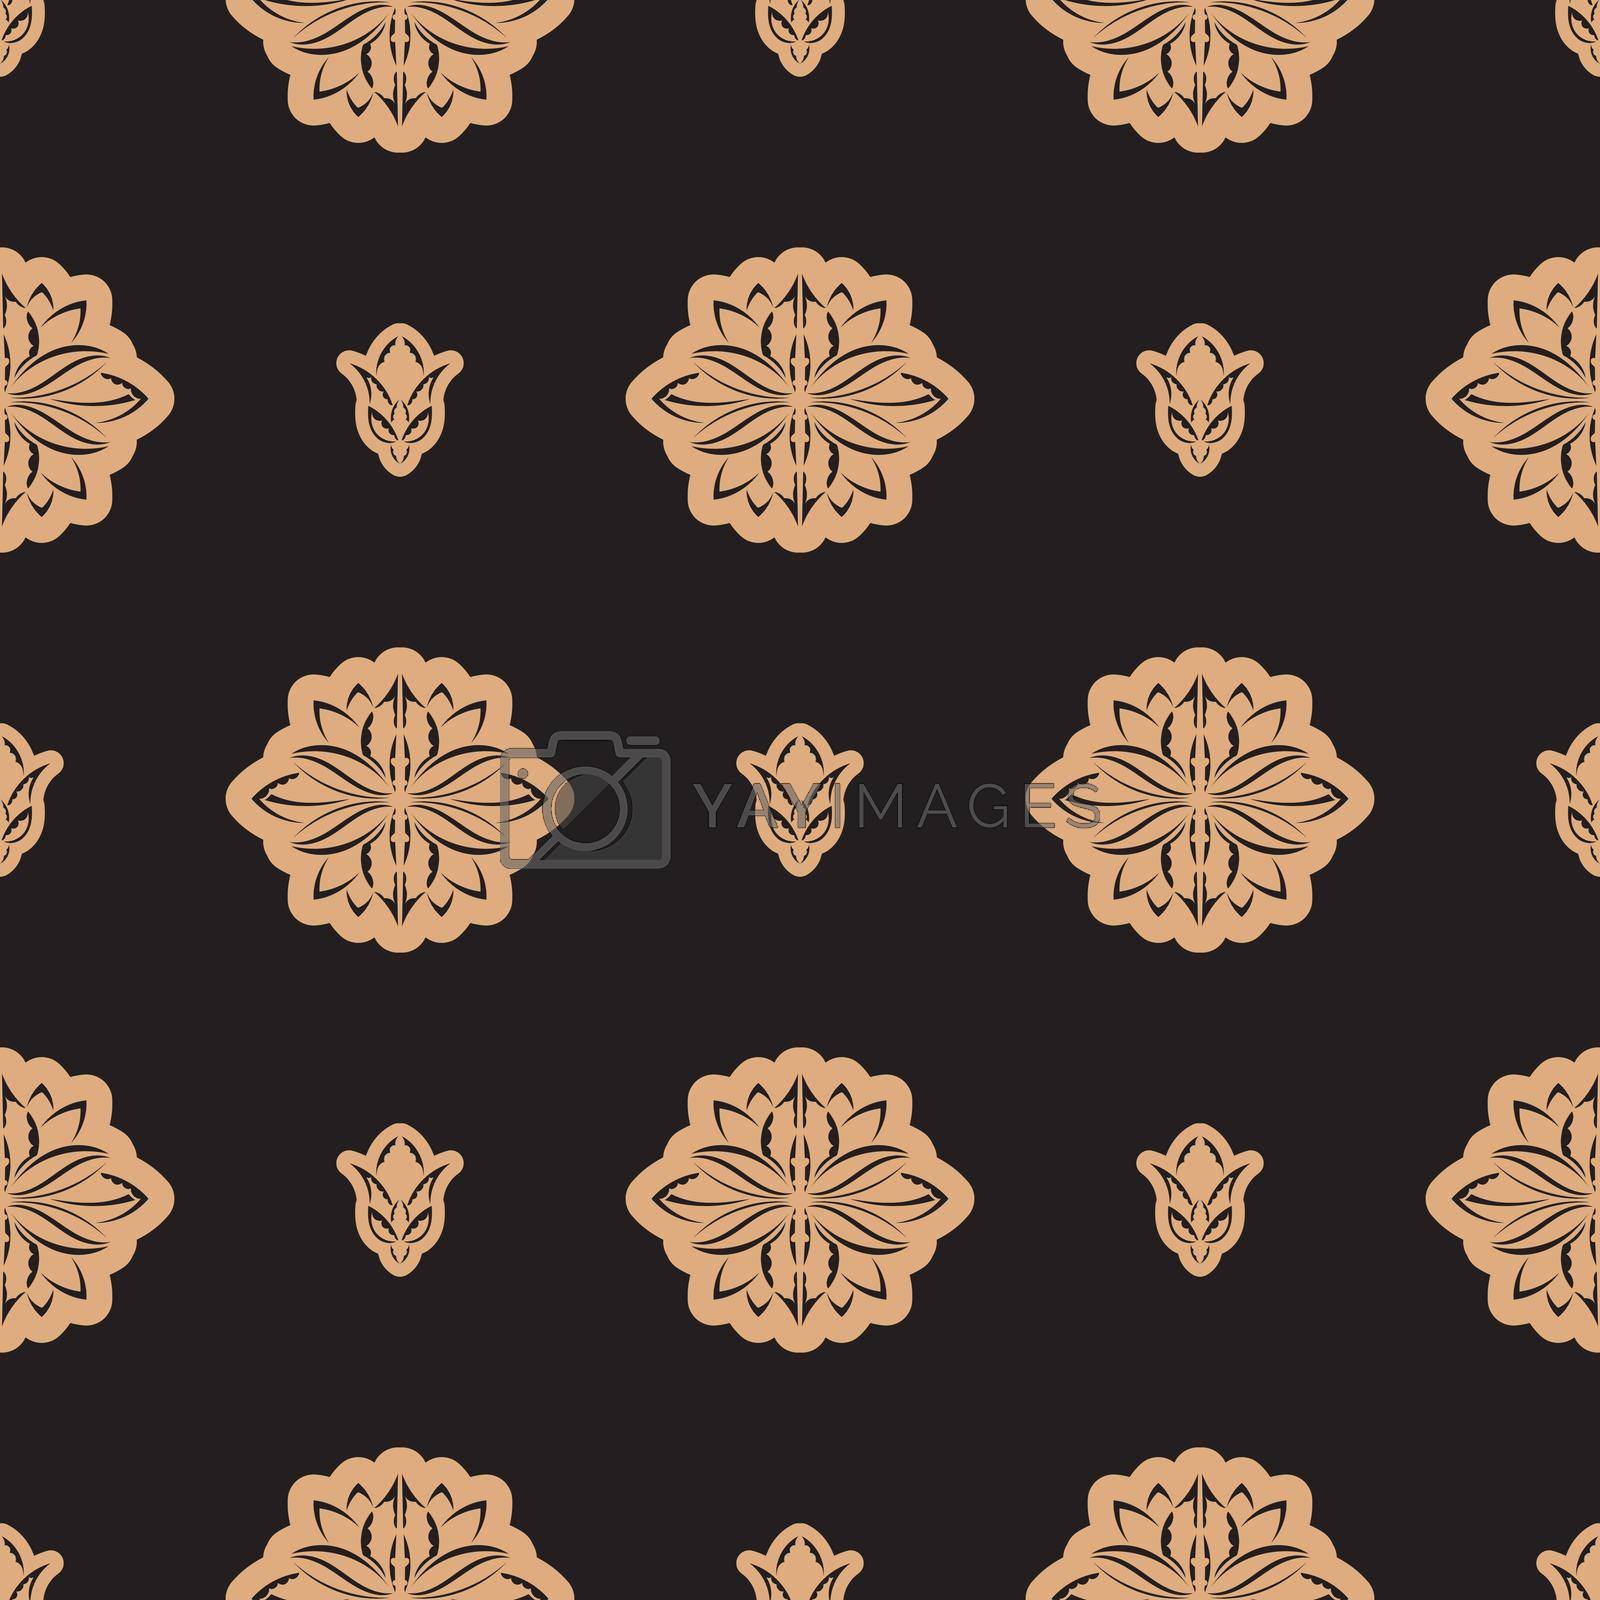 Dark solid color Seamless pattern with lotuses in Simple style. Good for backgrounds and prints. Vector illustration.